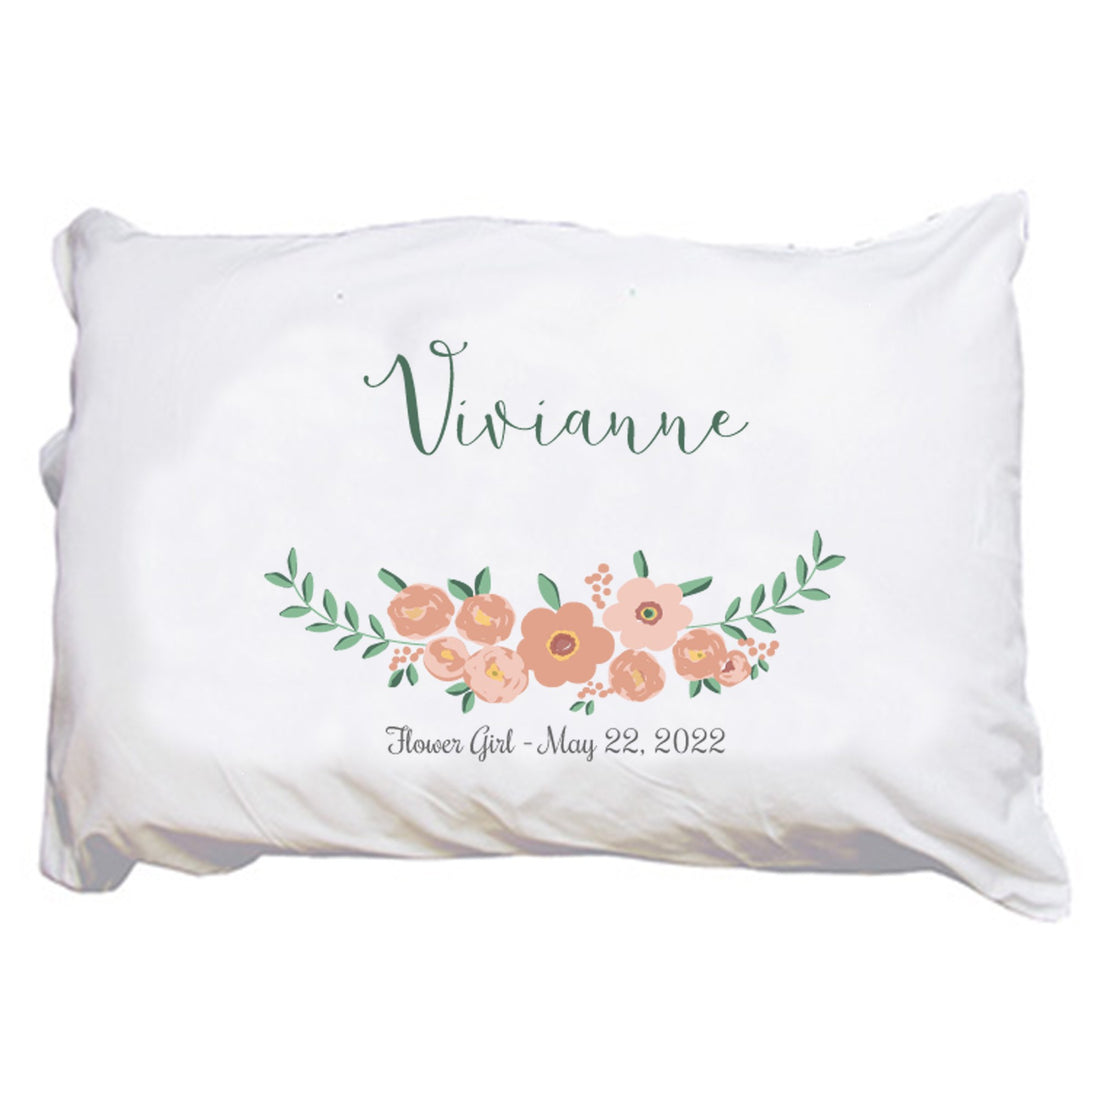 Personalized Pillowcase - Blush Spring Floral